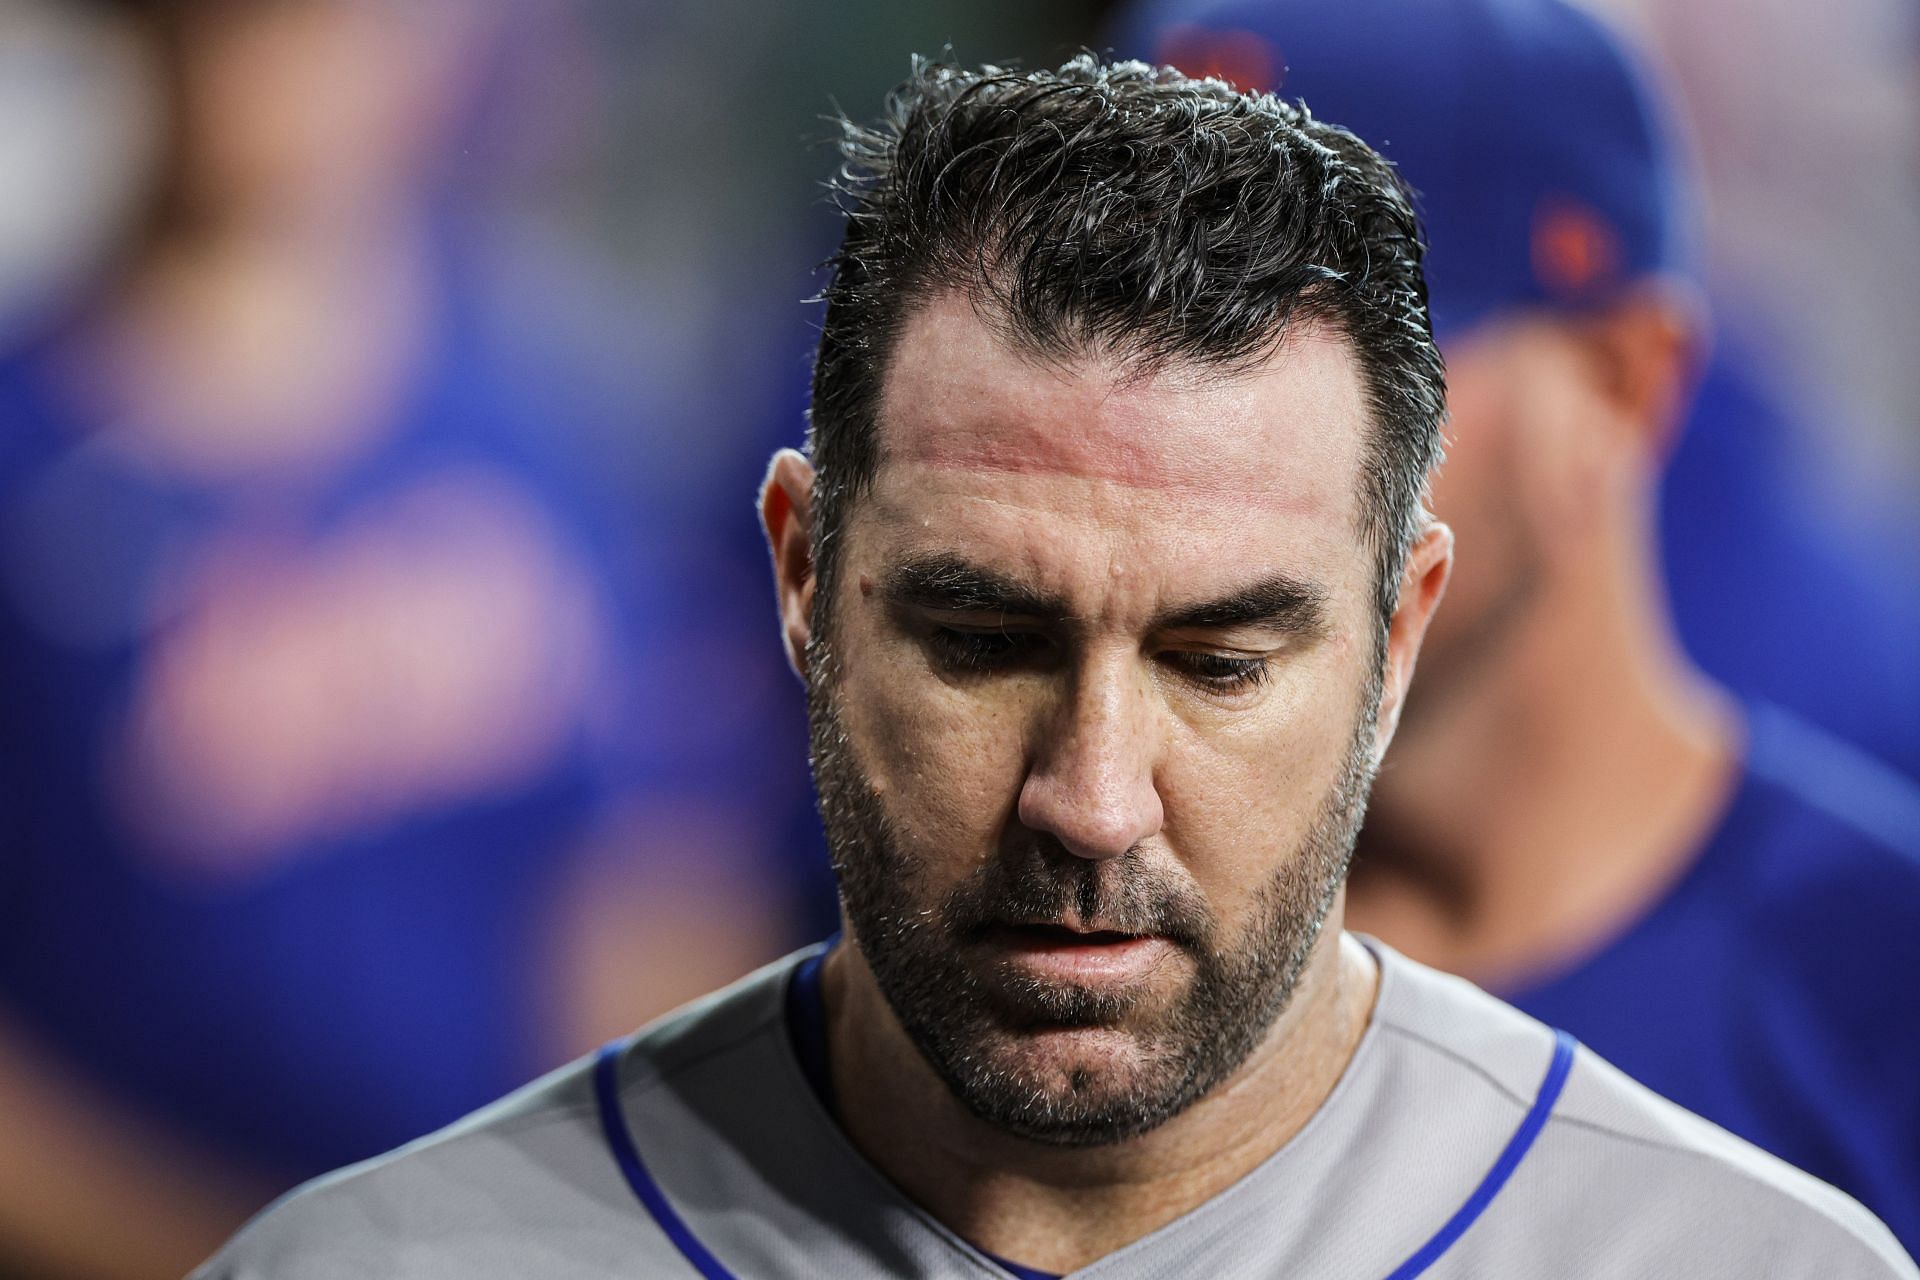 Justin Verlander of the New York Mets walks in the dugout prior to facing the Houston Astros at Minute Maid Park